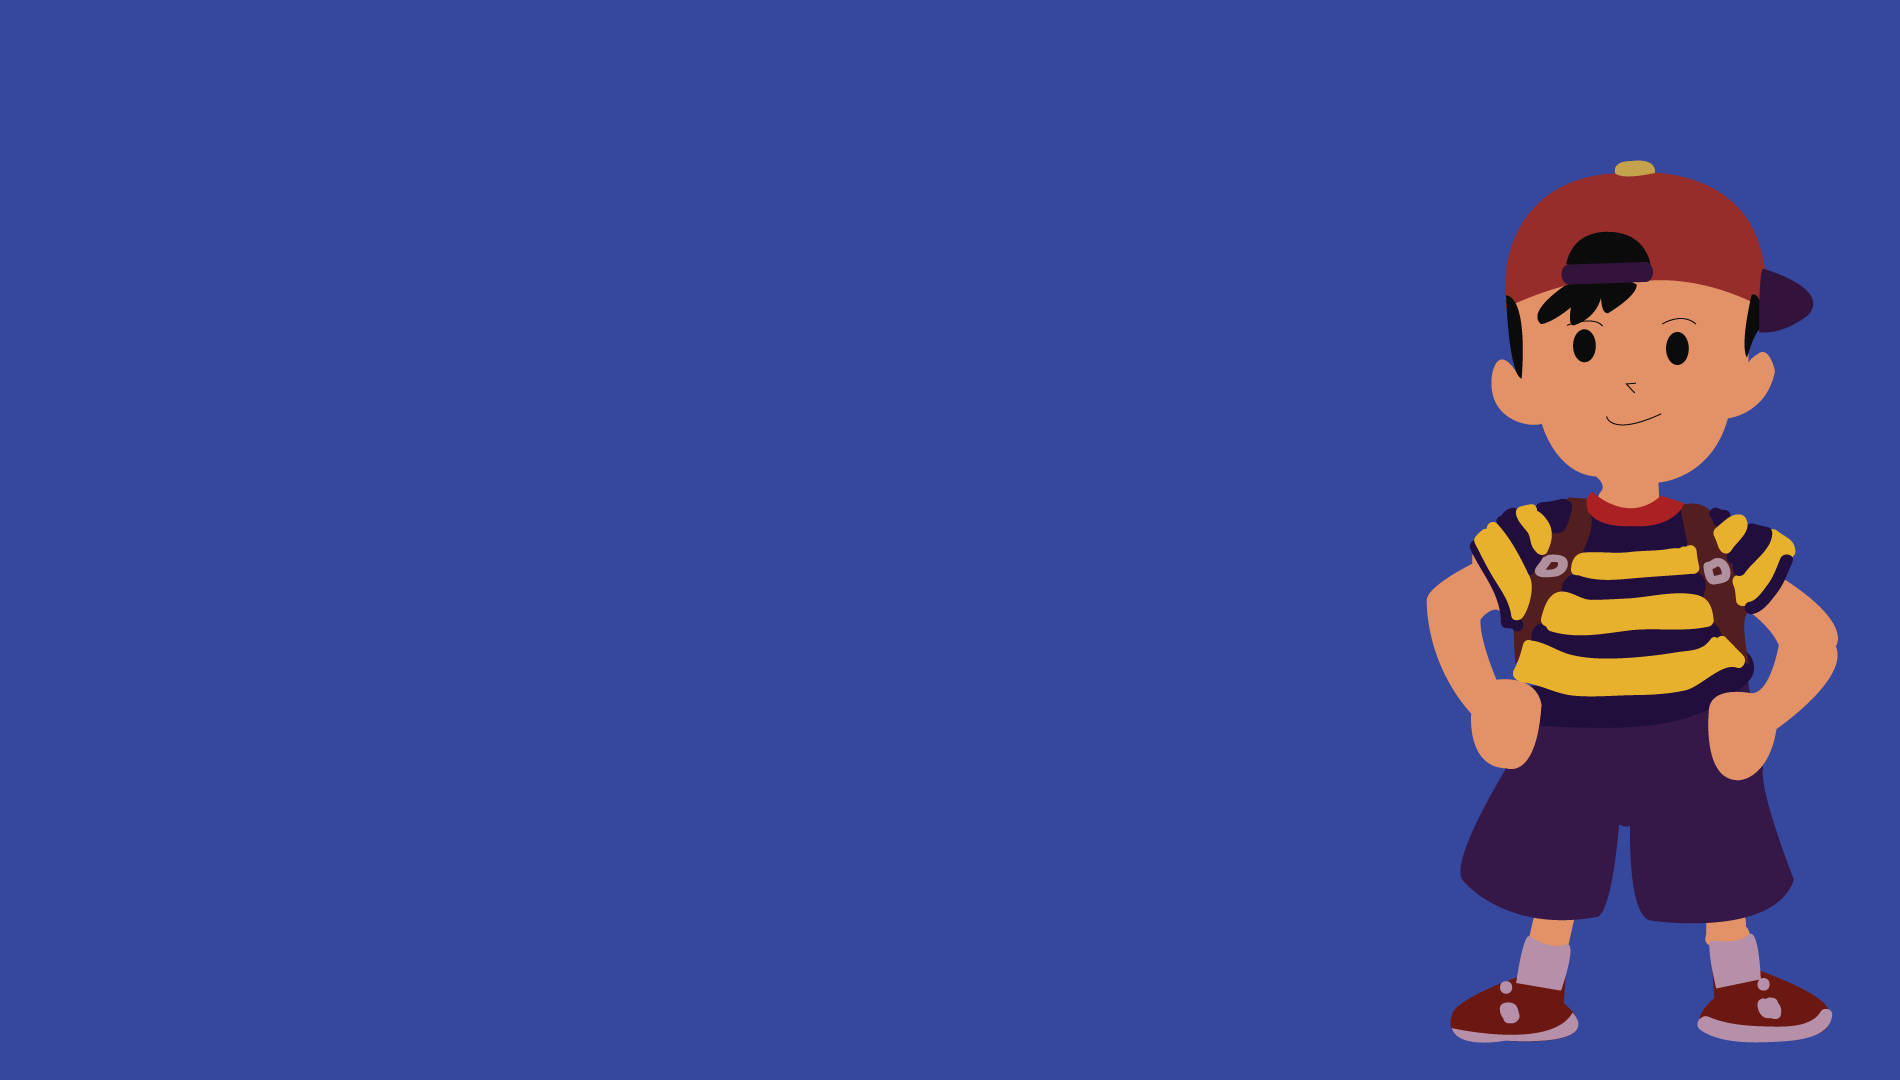 Minimalist Ness Of Earthbound In Blue